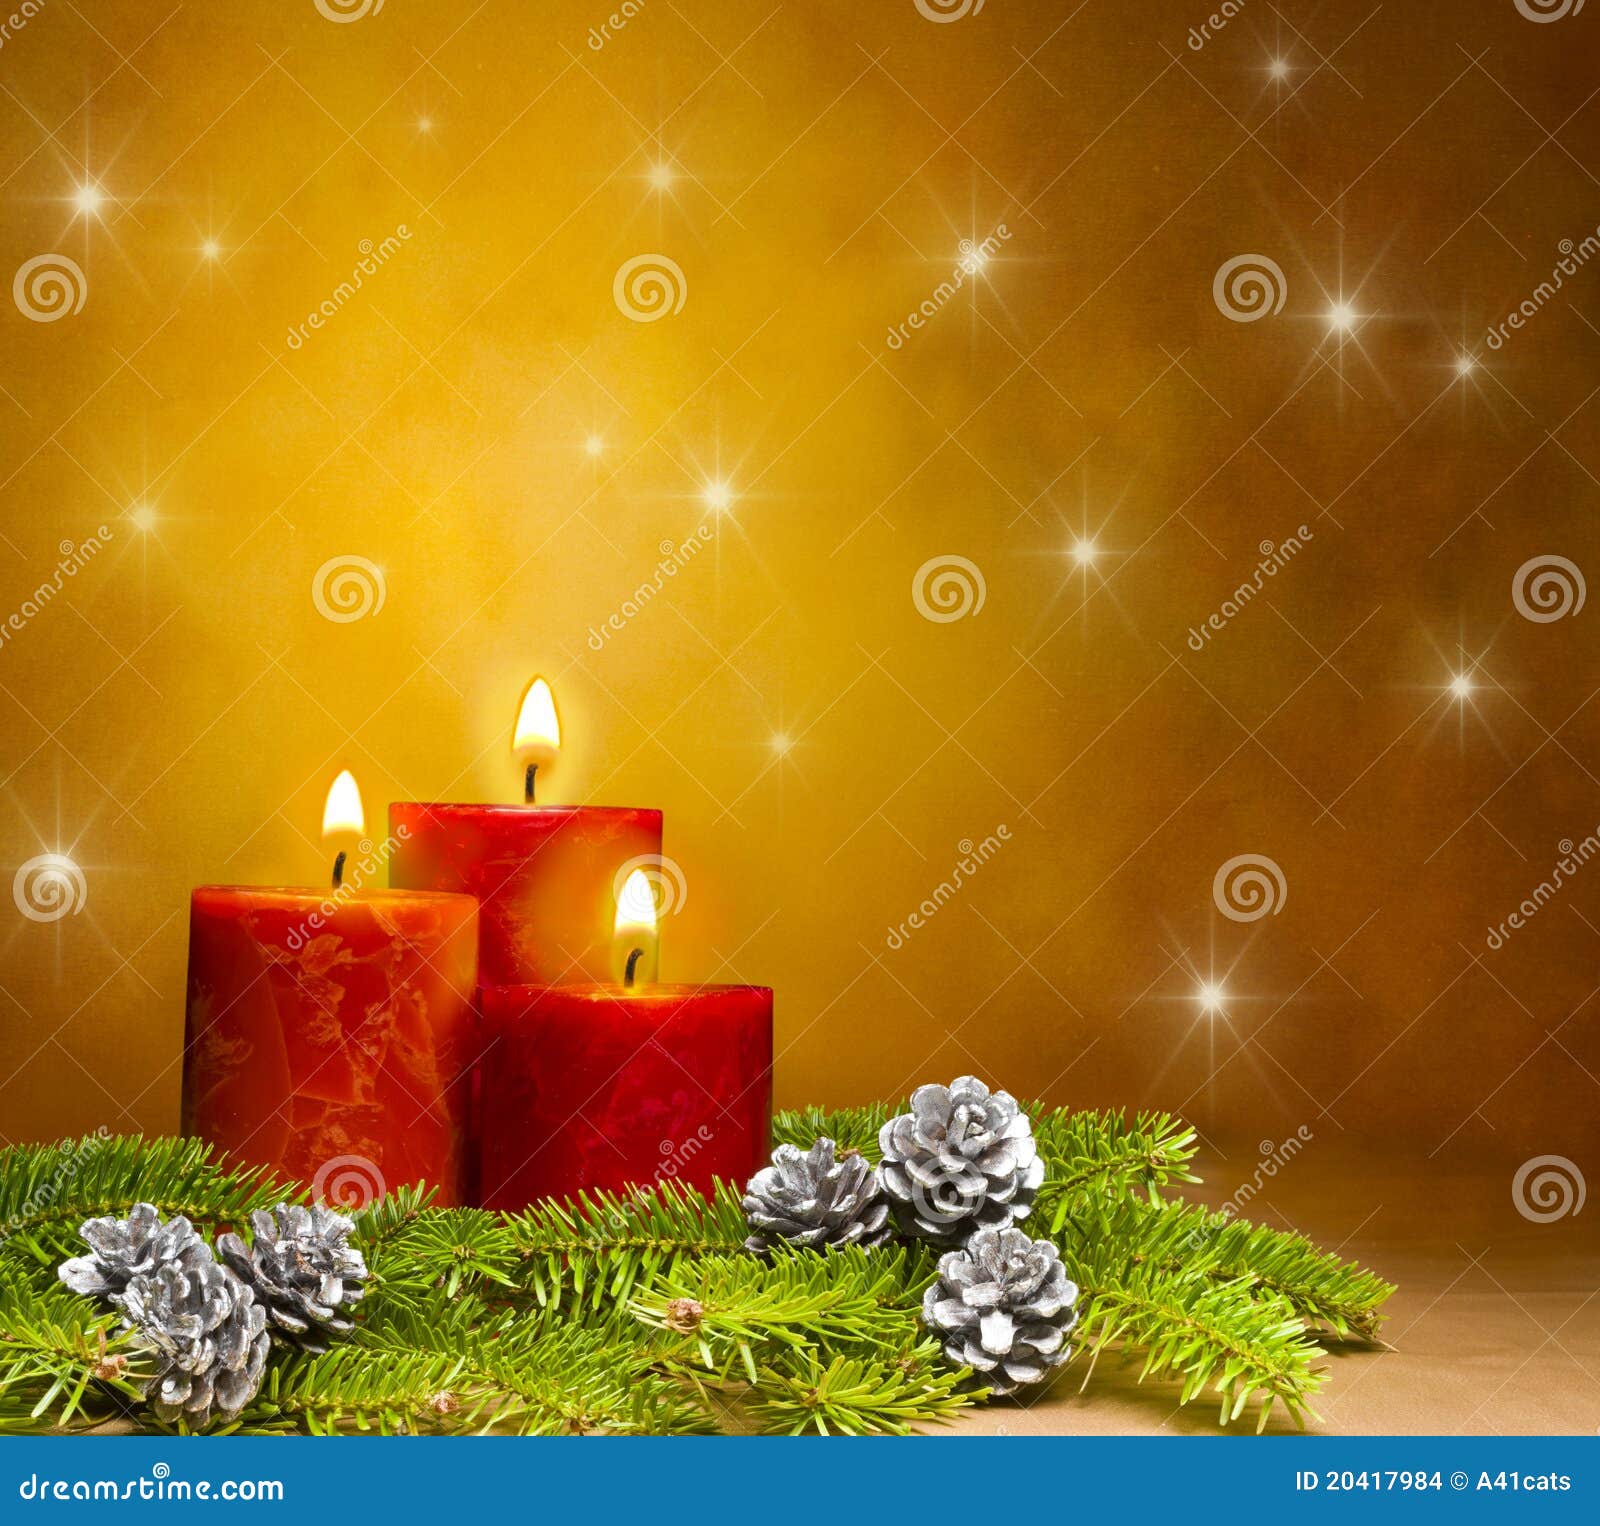 three candles in a festive christmas setting